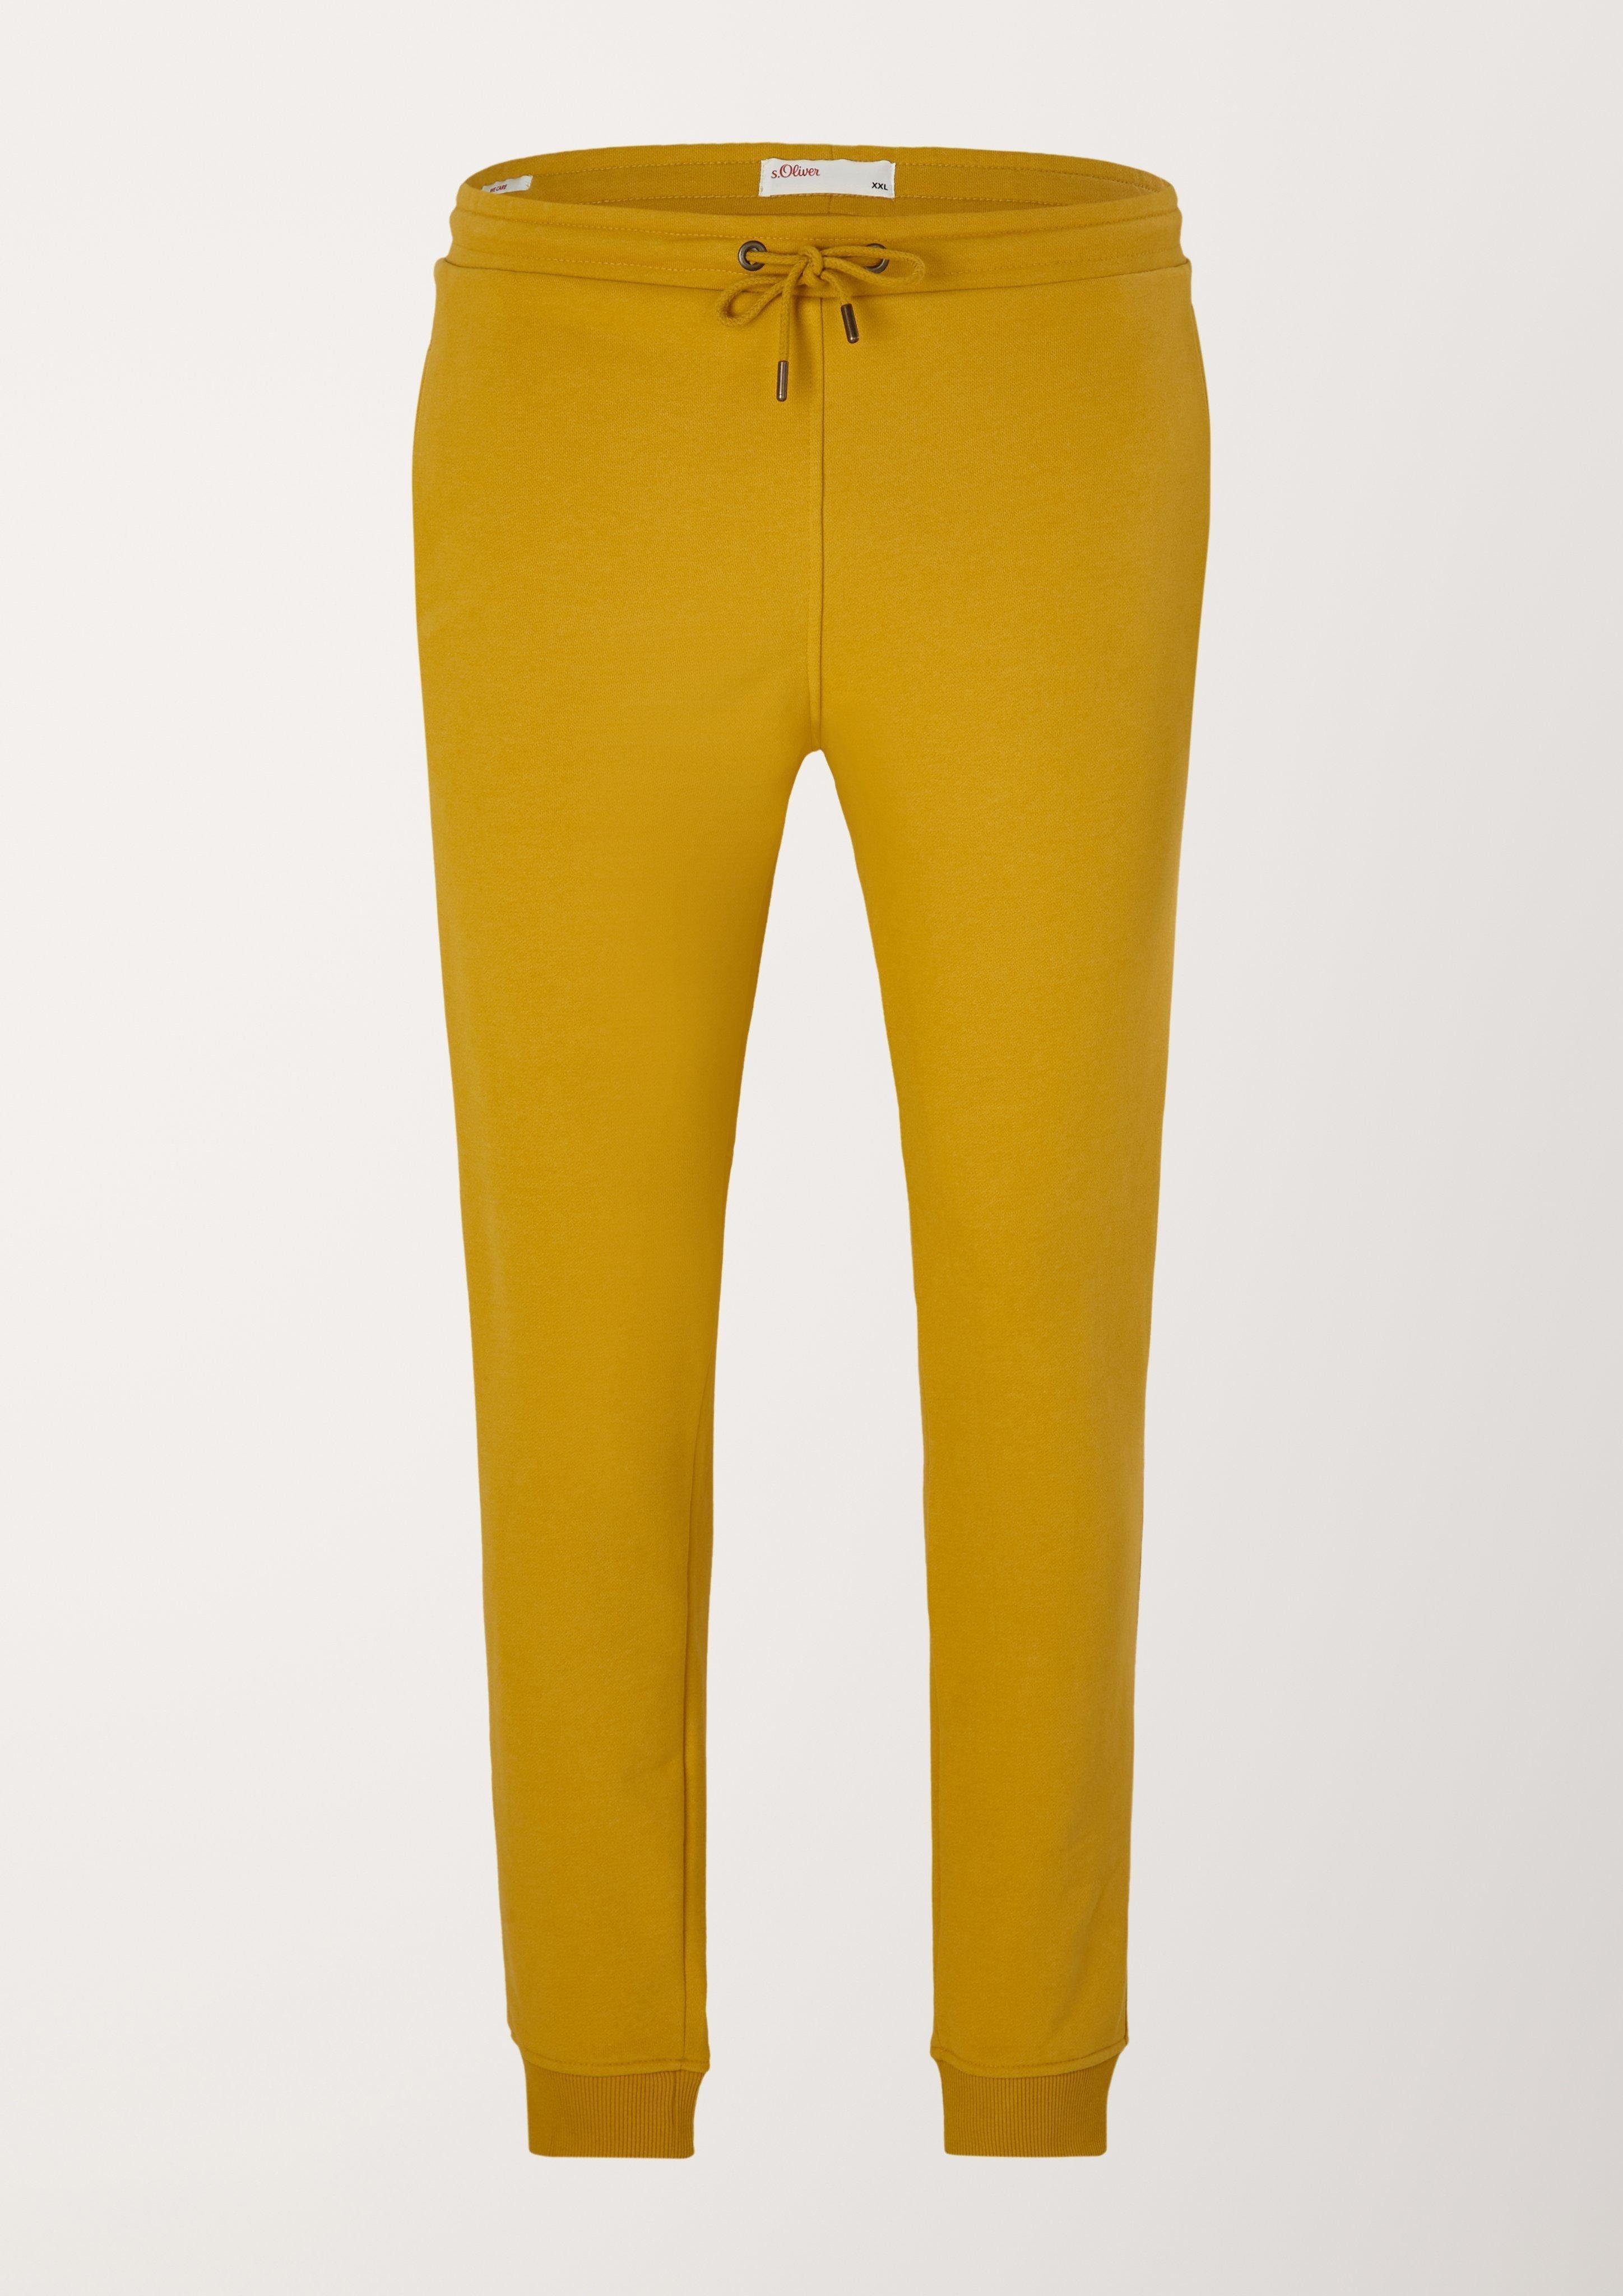 Jogger Relaxed: s.Oliver yellow aus Sweat Stoffhose Rippbündchen